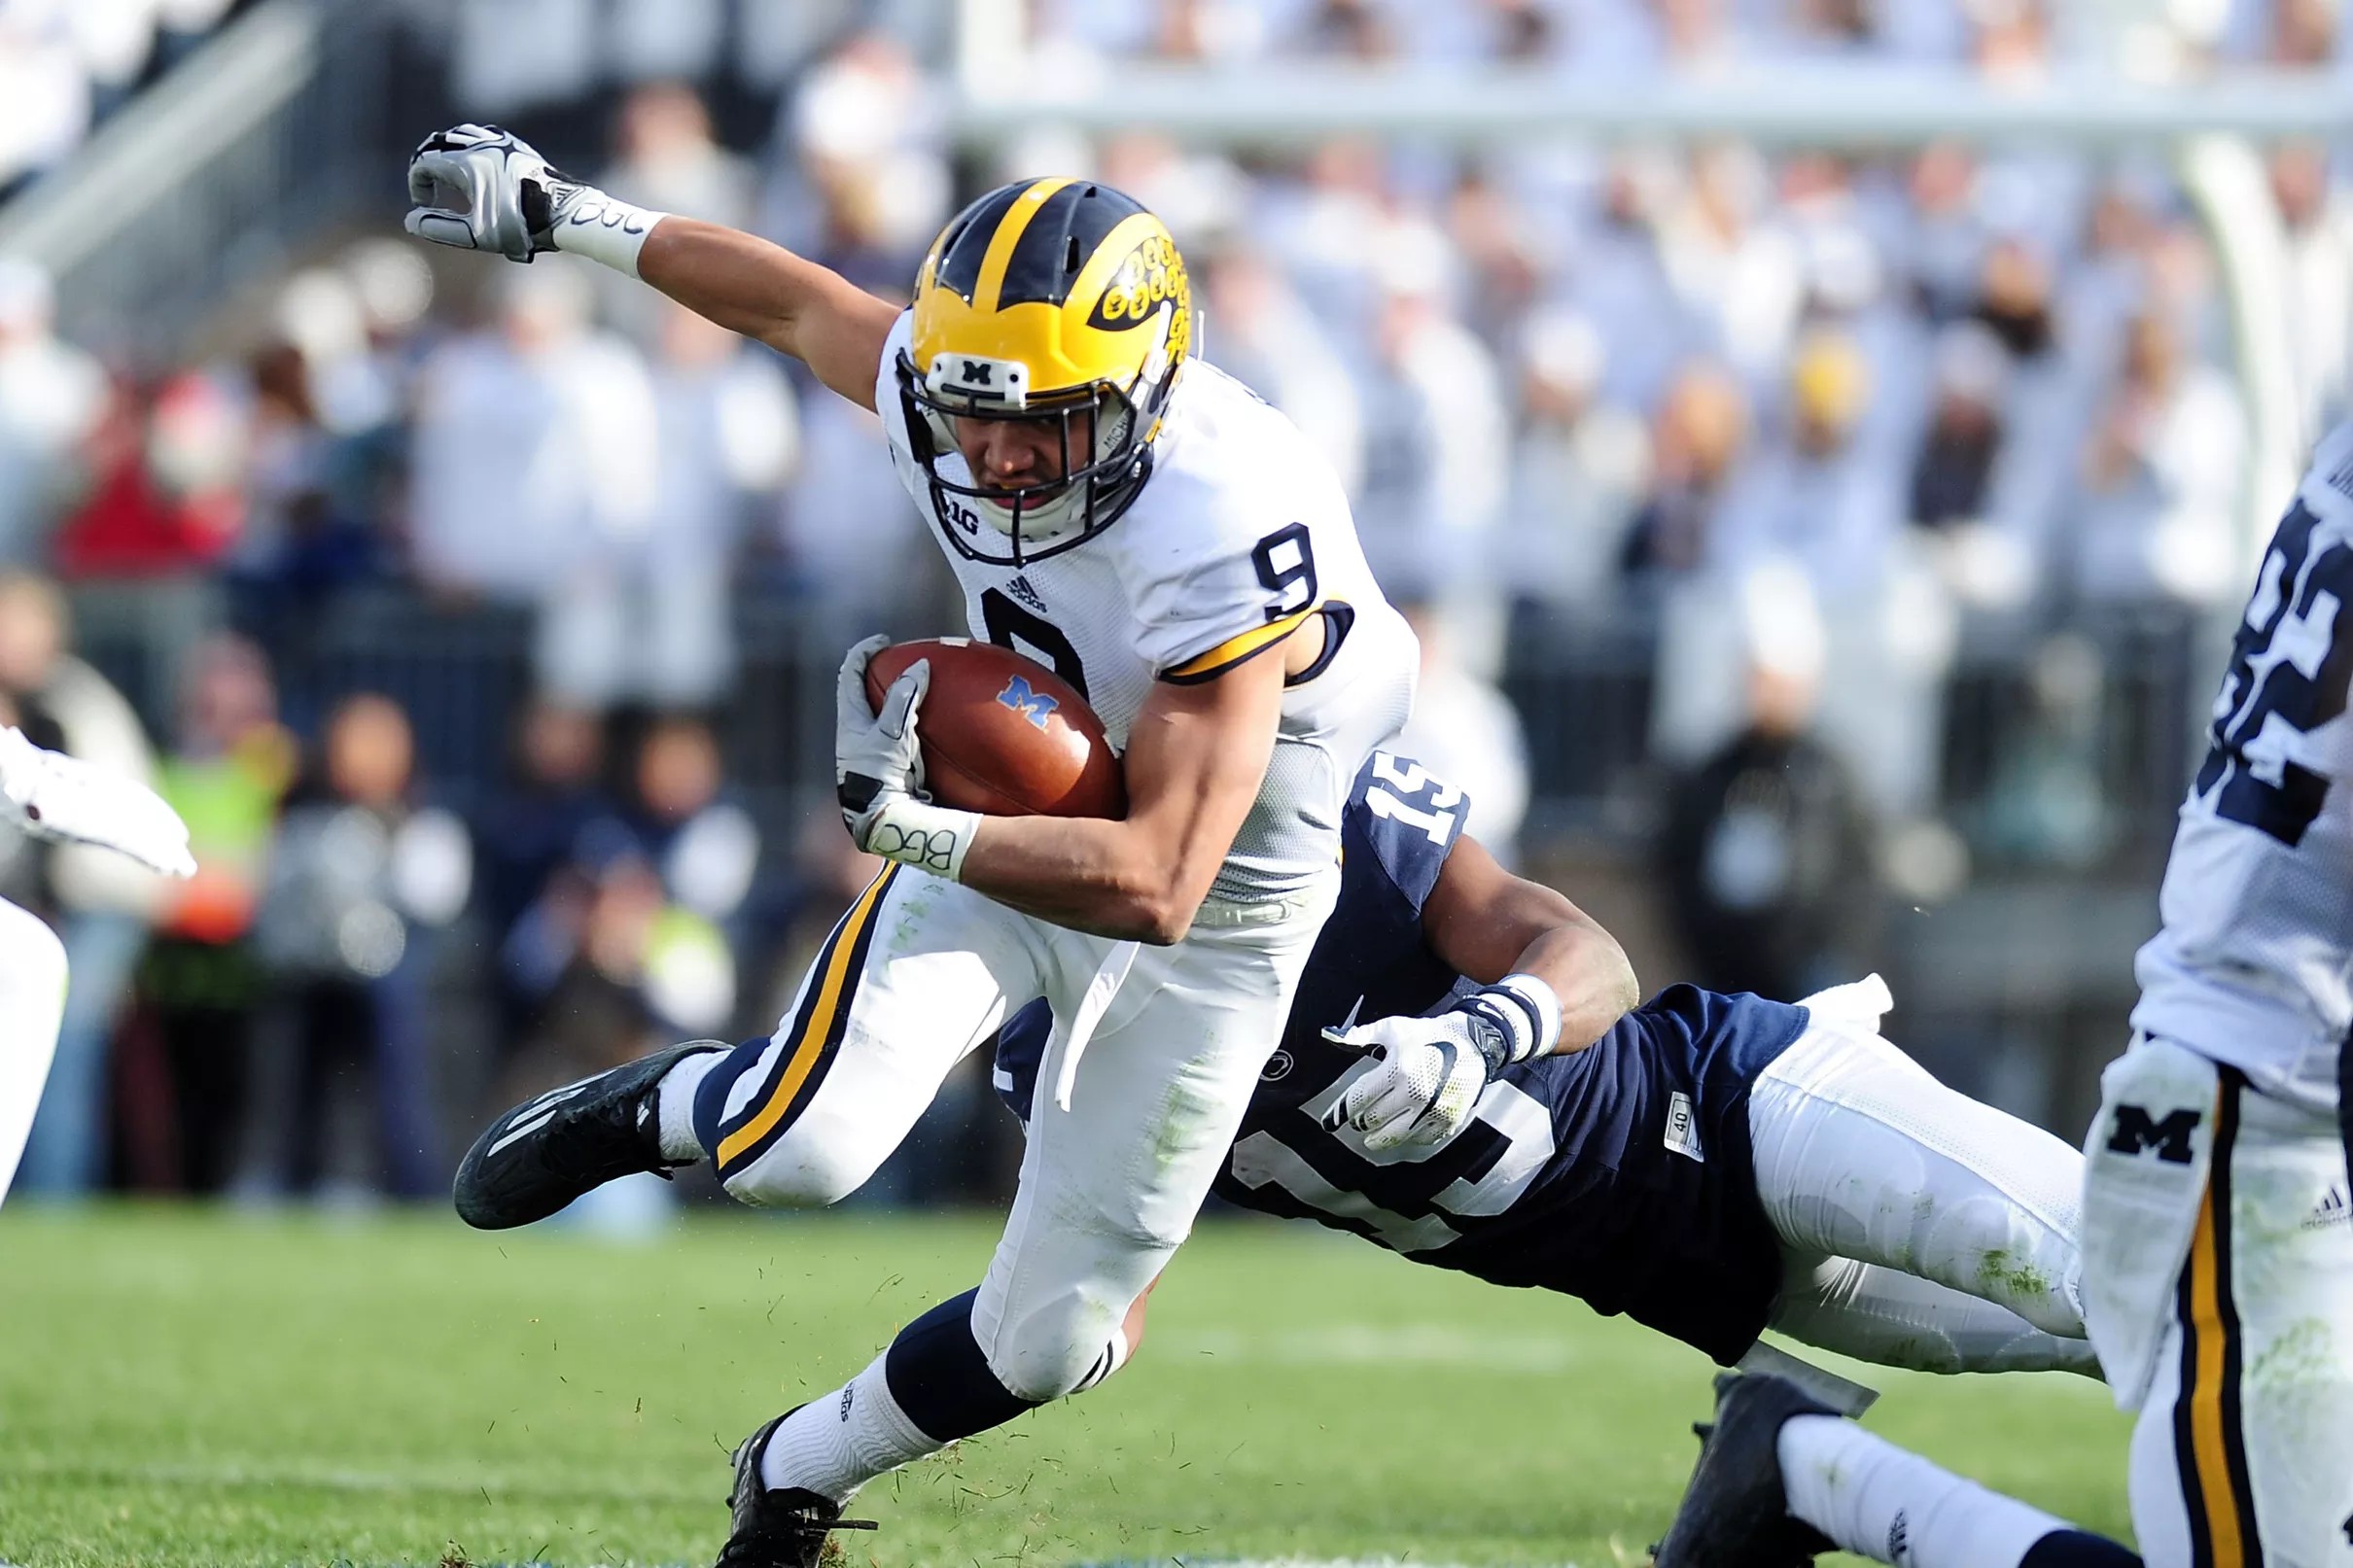 Poll Who do you think ends up leading Michigan in receiving yards?